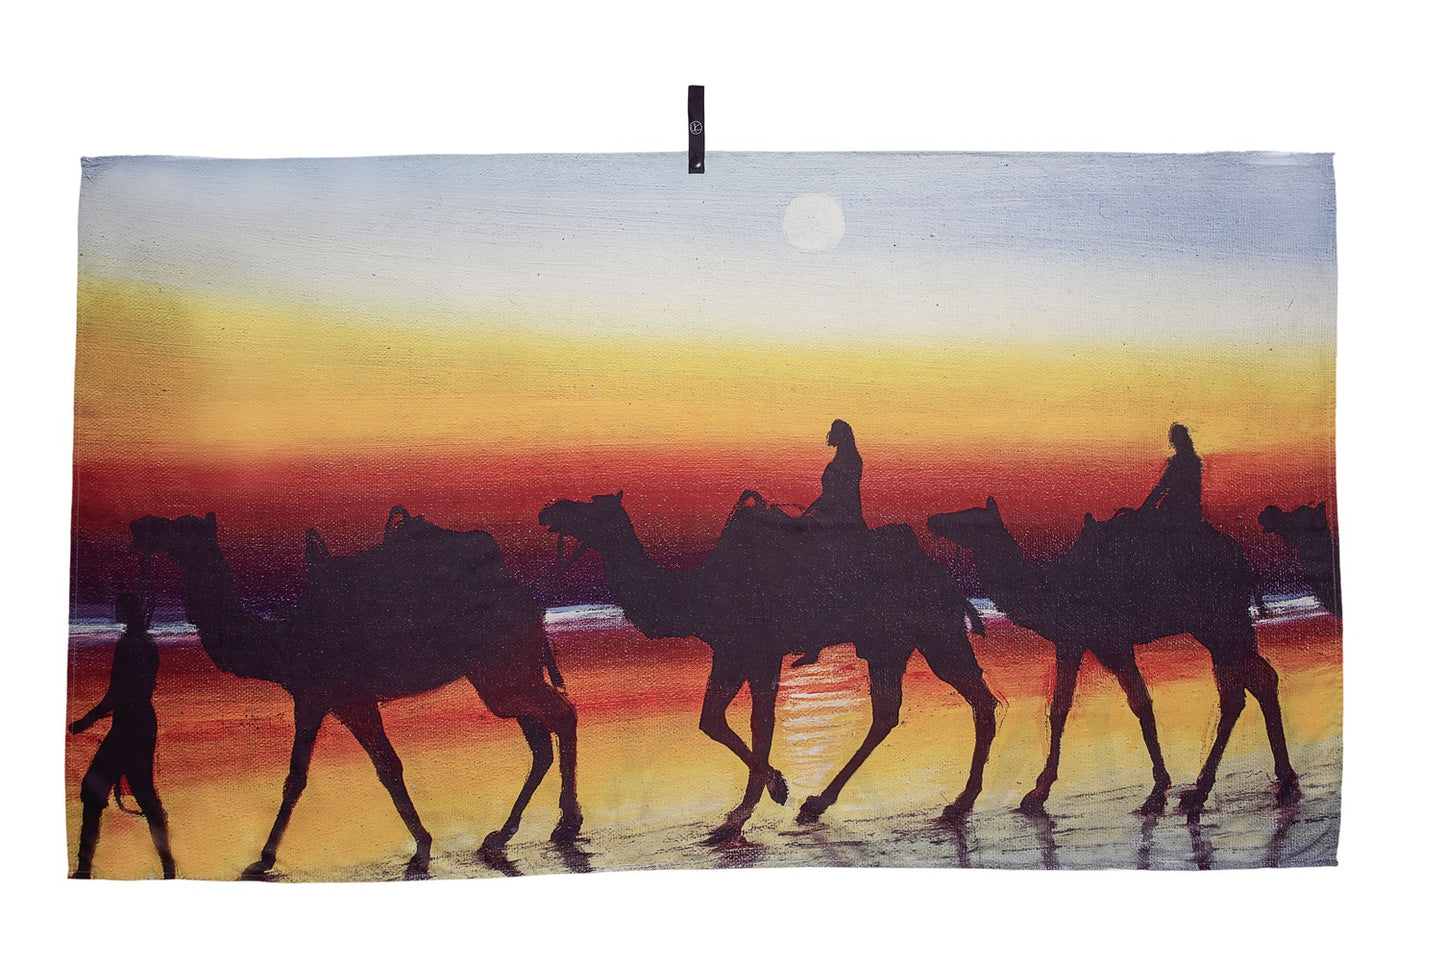 Broome microfibre artistic towel. The towel shows Broome’s famous camel ride at the beach during sunset and the full moon in the sky being reflected by the wet coastal sand. An art also inspired by the contrast of the red desert with the clear blue waters of the ocean. Large size, 170cm x 95cm, soft touch, compact and sand free beach towel. An Aussie-inspired art showcasing magnificent landmarks and the Aussie lifestyle.